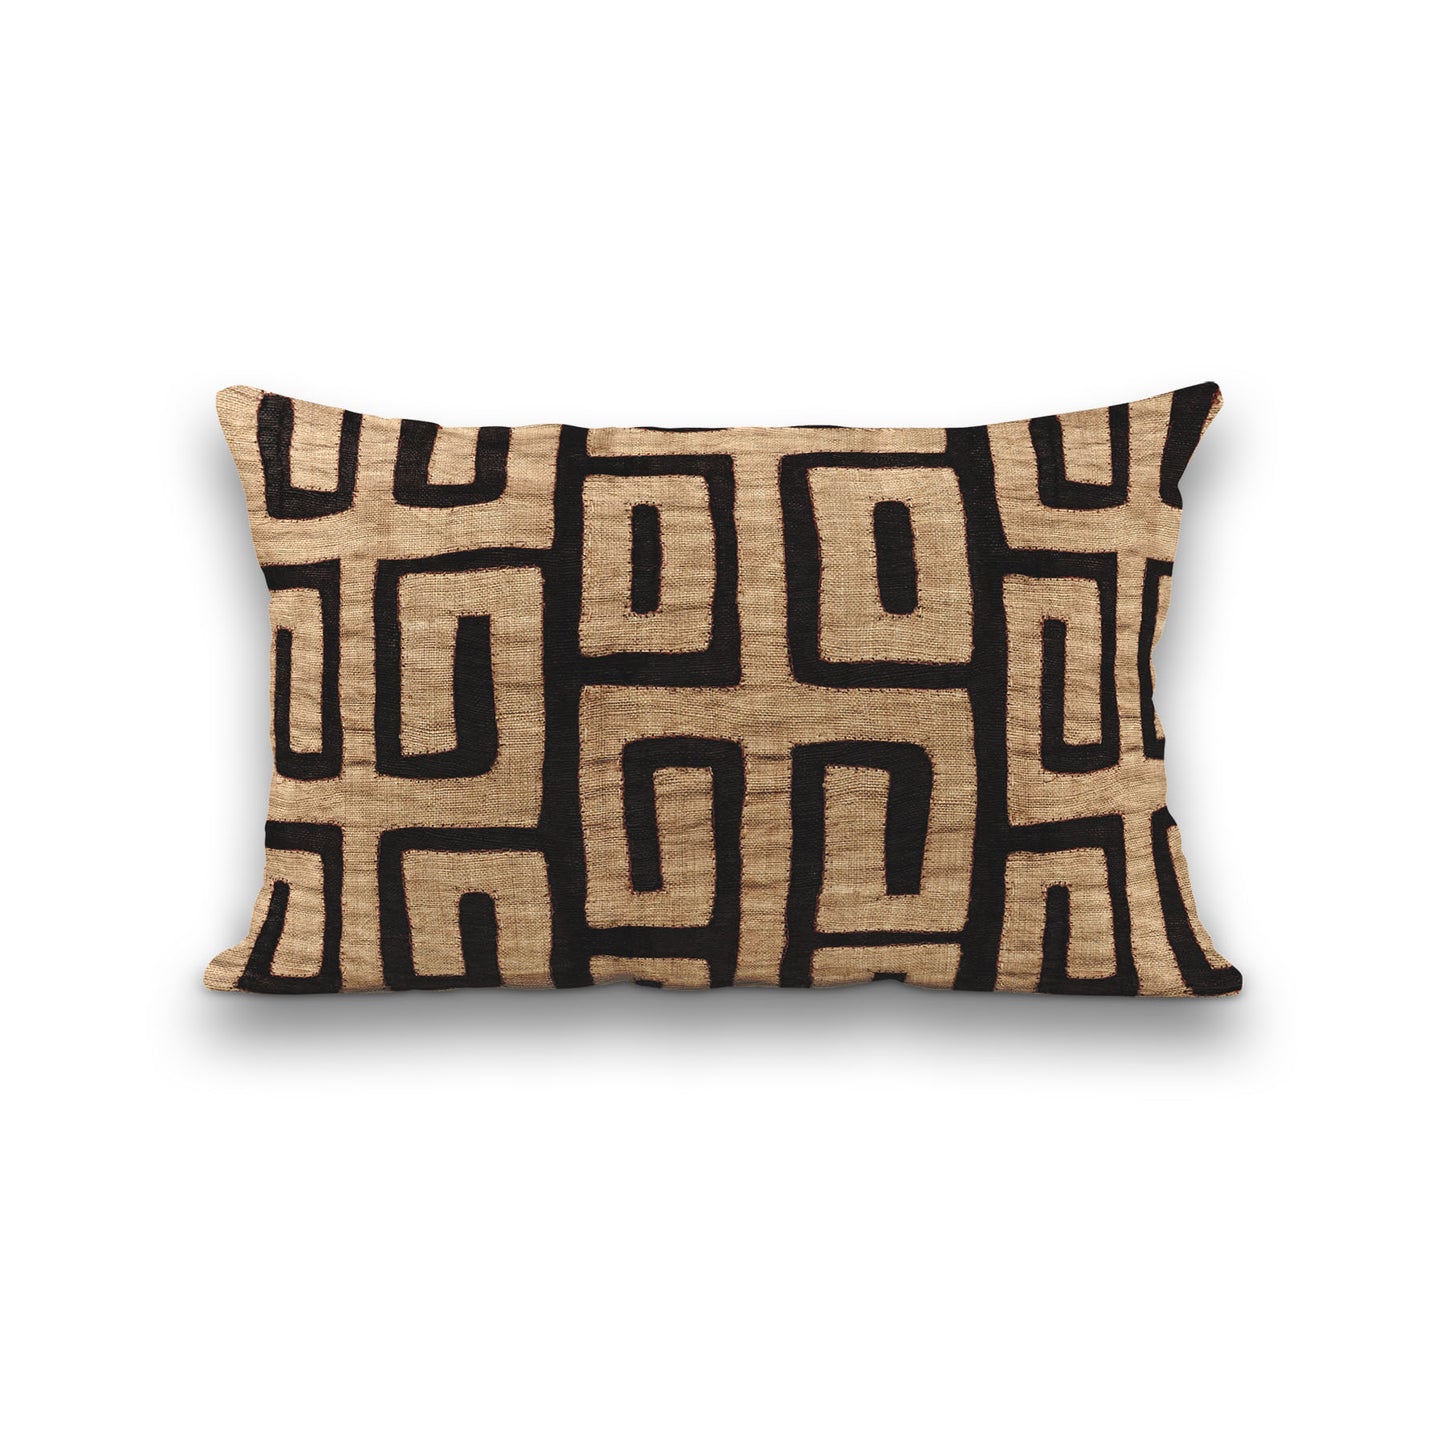 AnitaveeTextile African Kuba Cloth Pillows in Natural Tan and Black - 3 Sizes